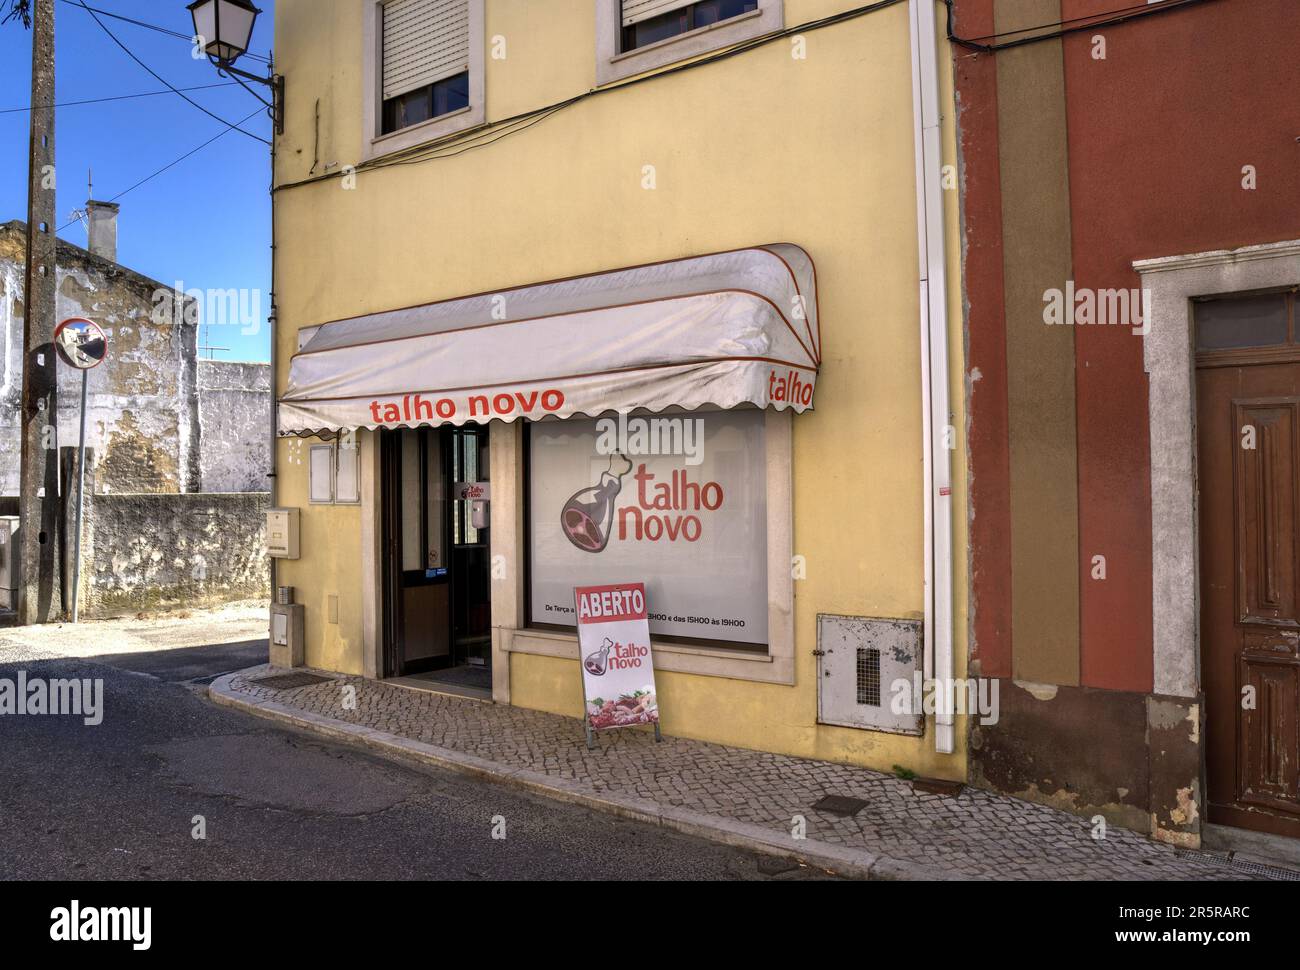 Quiaios, Portugal - August 14, 2022: Exterior of butcher's shop talho novo showing signage and depiction of joint of meat Stock Photo